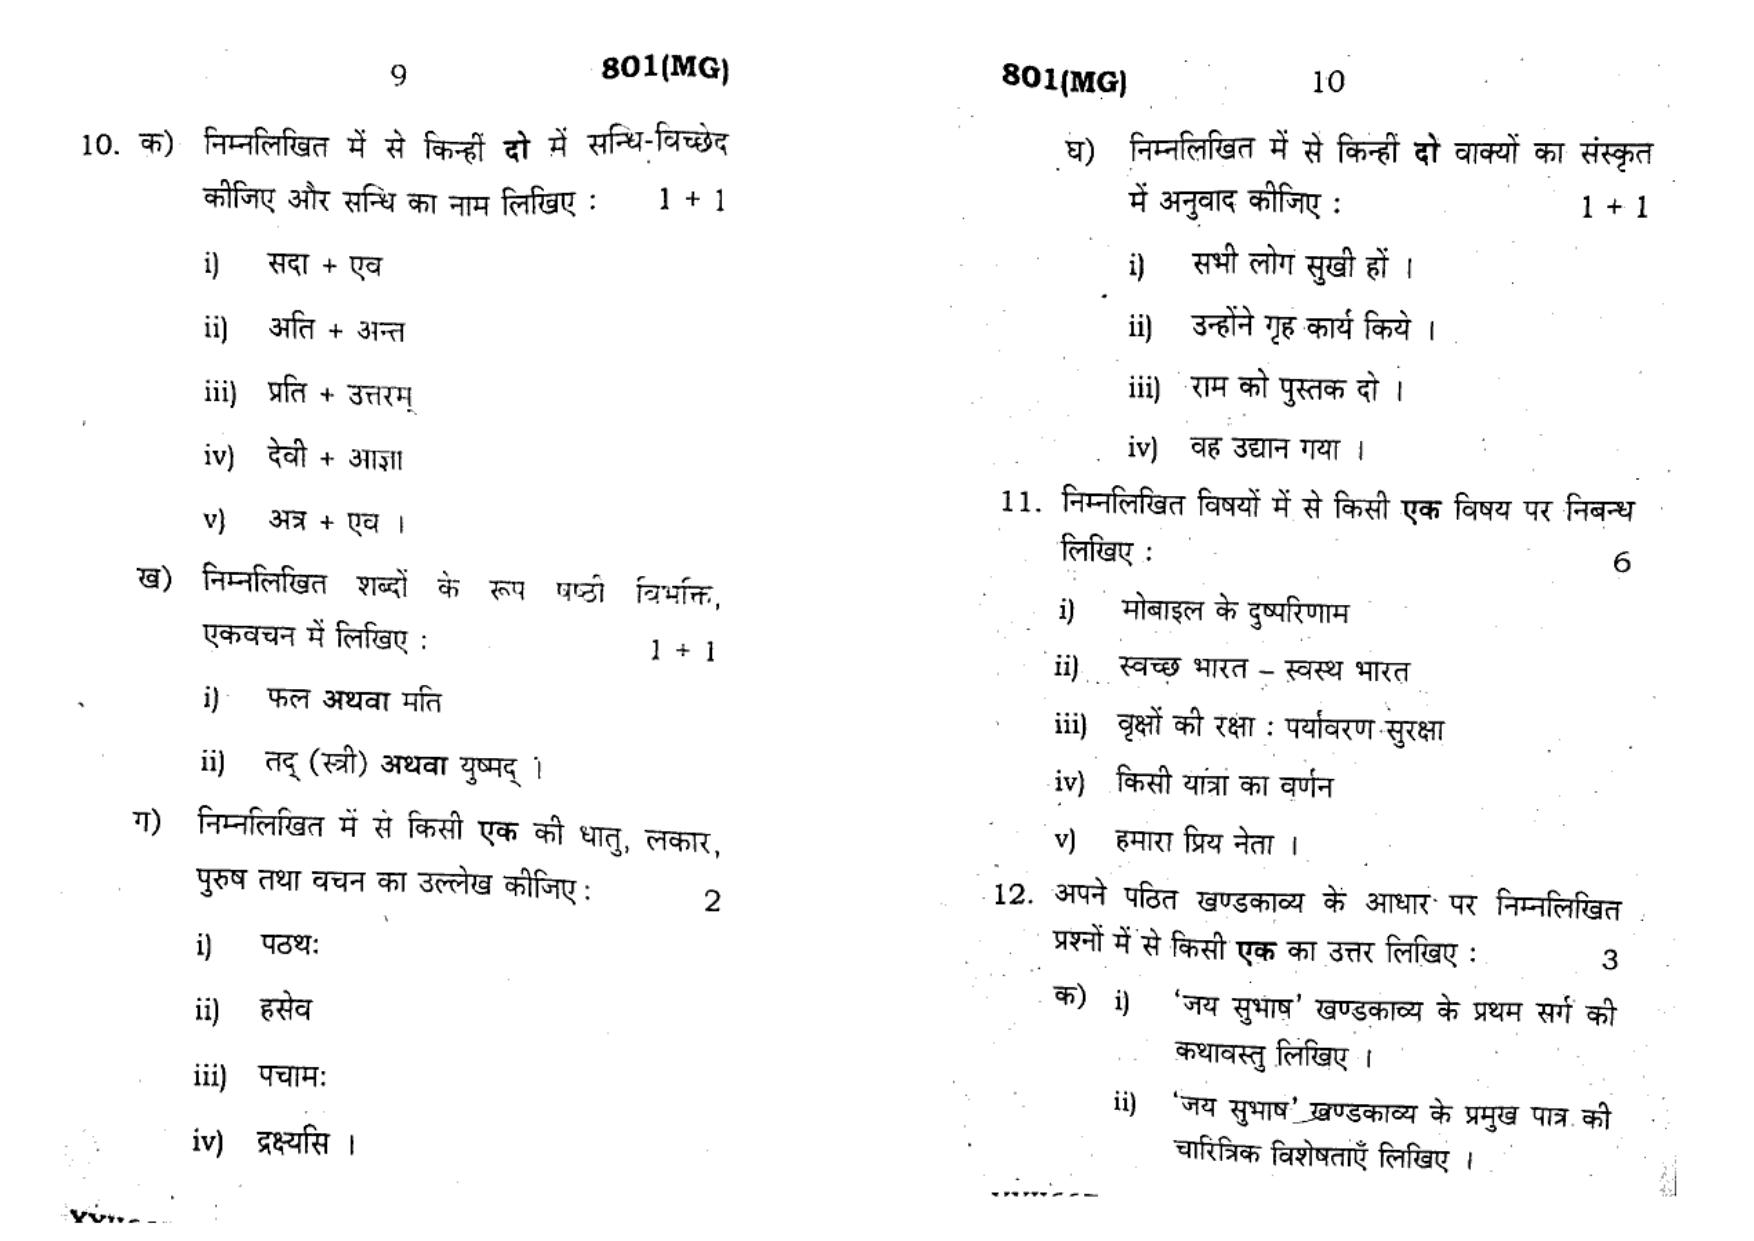 UP Board Previous Year Question Paper Class 10 Hindi (801 MG) – 2020 - Page 5